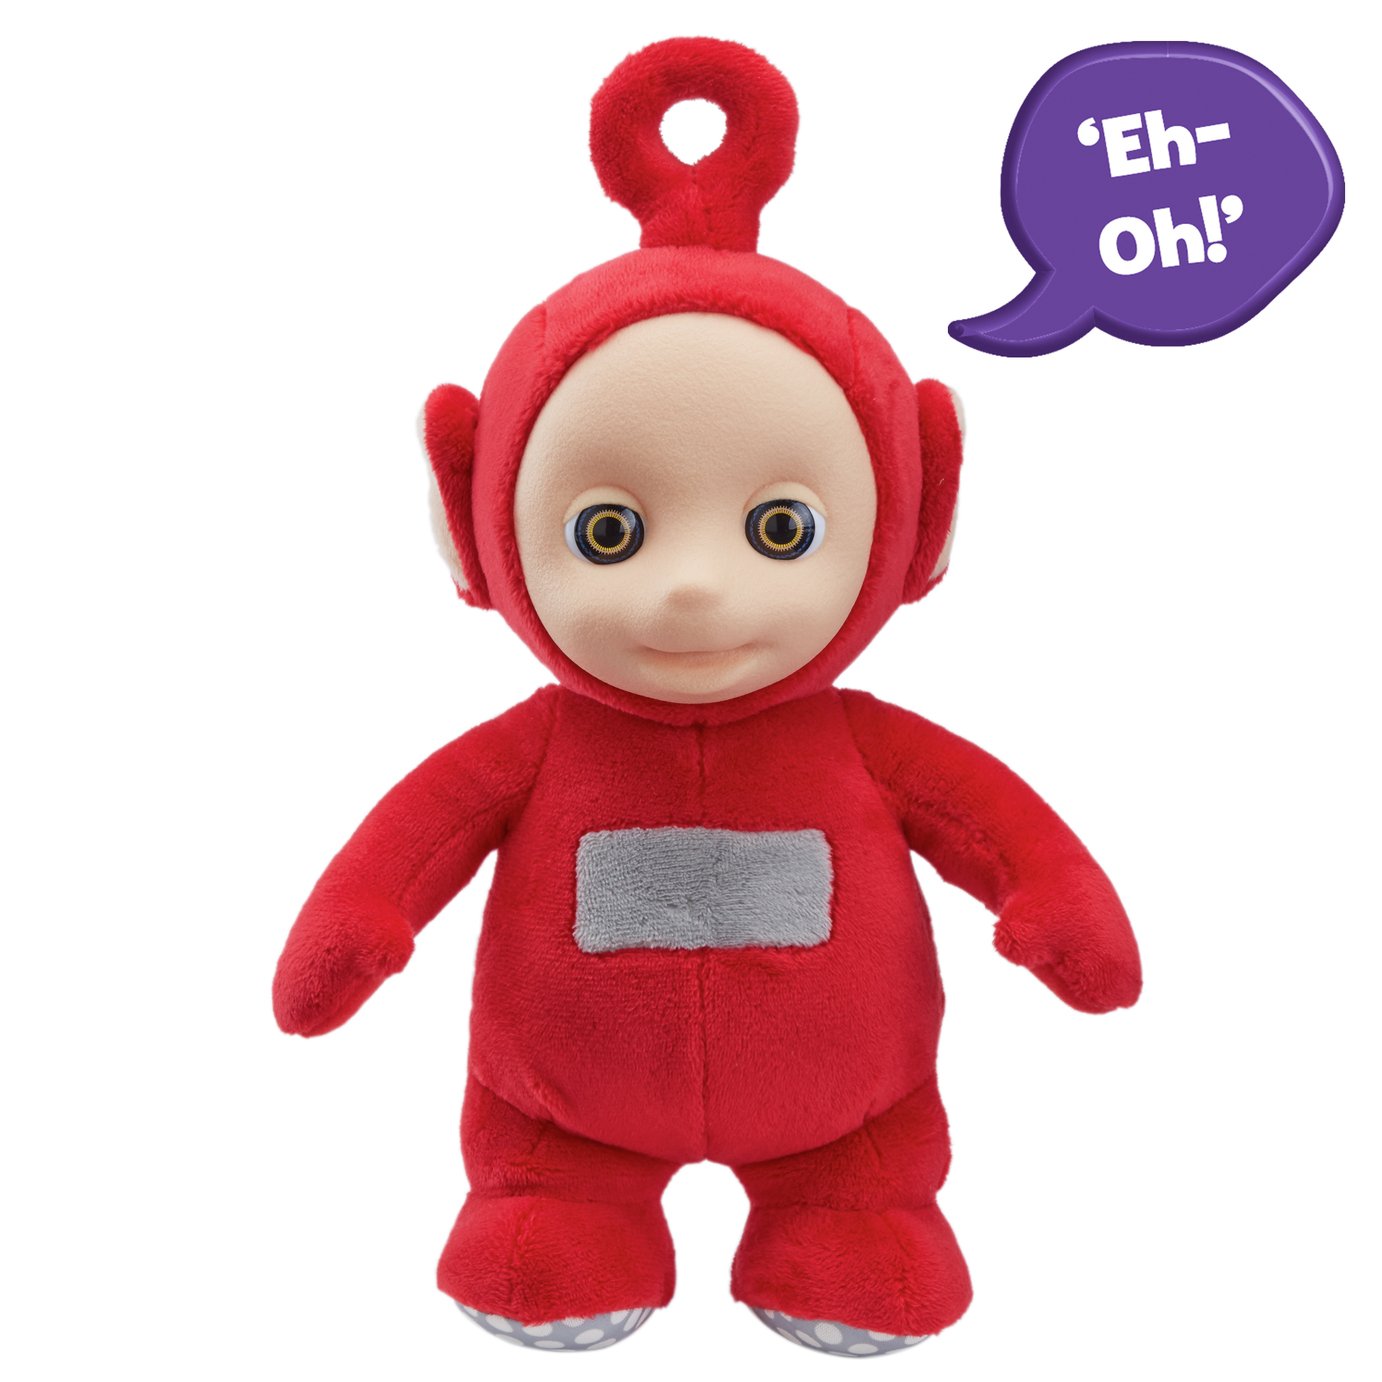 Teletubbies Talking Po Soft Toy Review